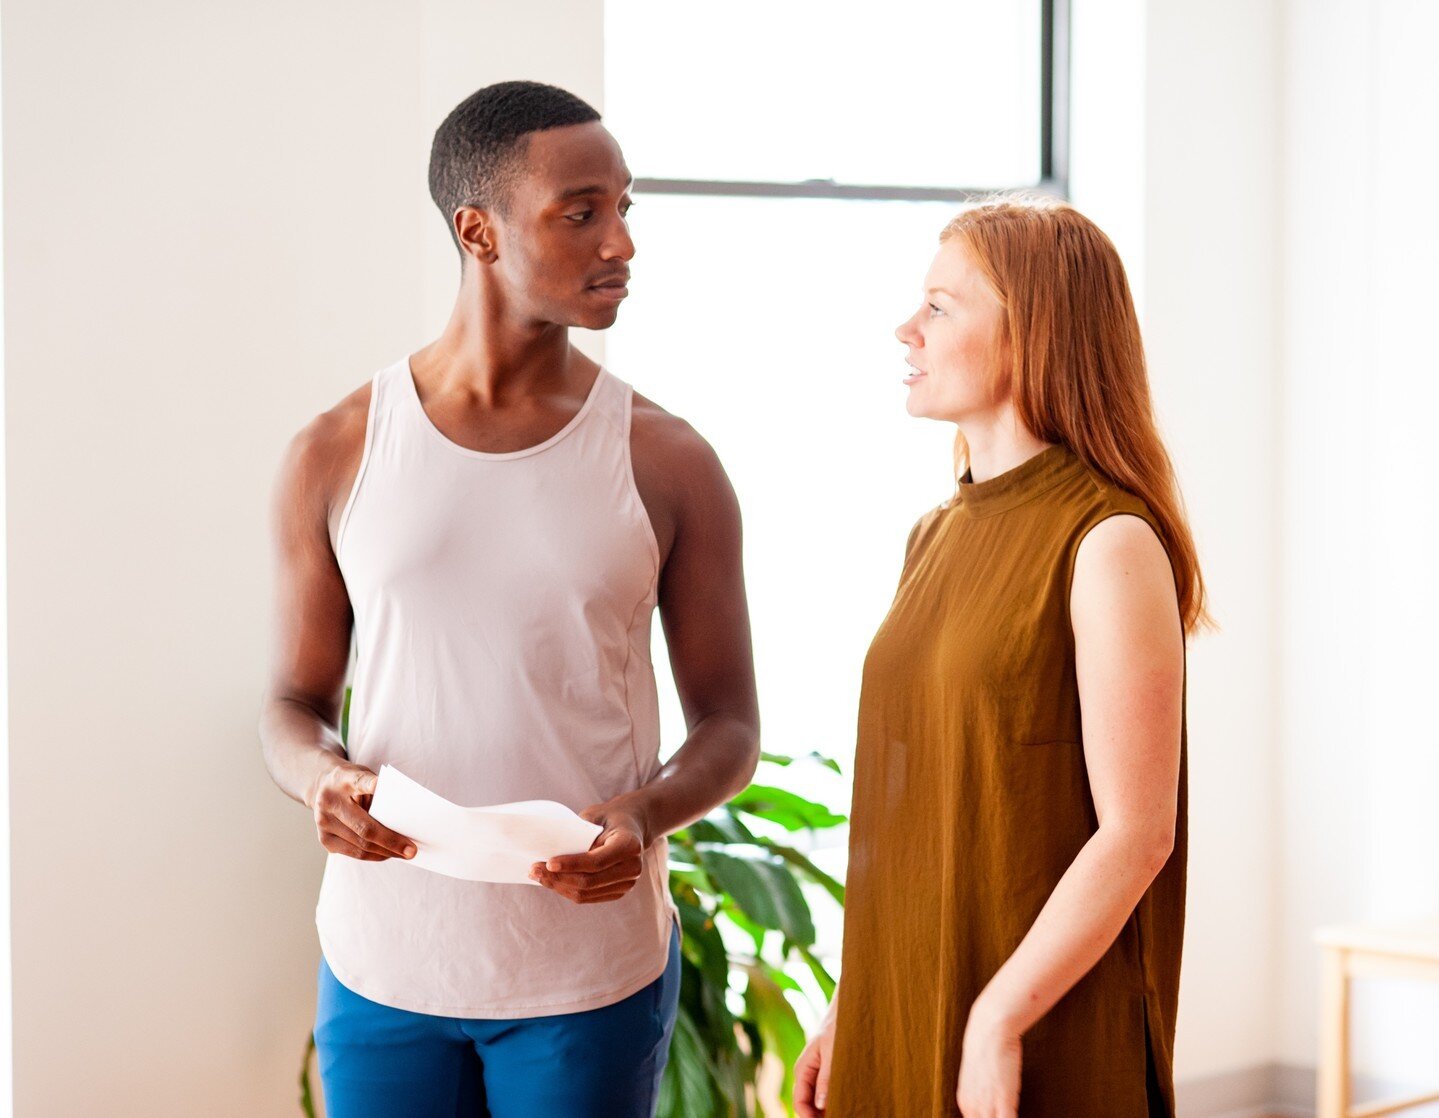 New Class for fall: Embodied Scene Partner Work for actors starts Monday! 

This will be a 4-week progressive course, with optional drop-in for actors who have previously studied with Teaching Presence. This course can be applied to both on-camera an